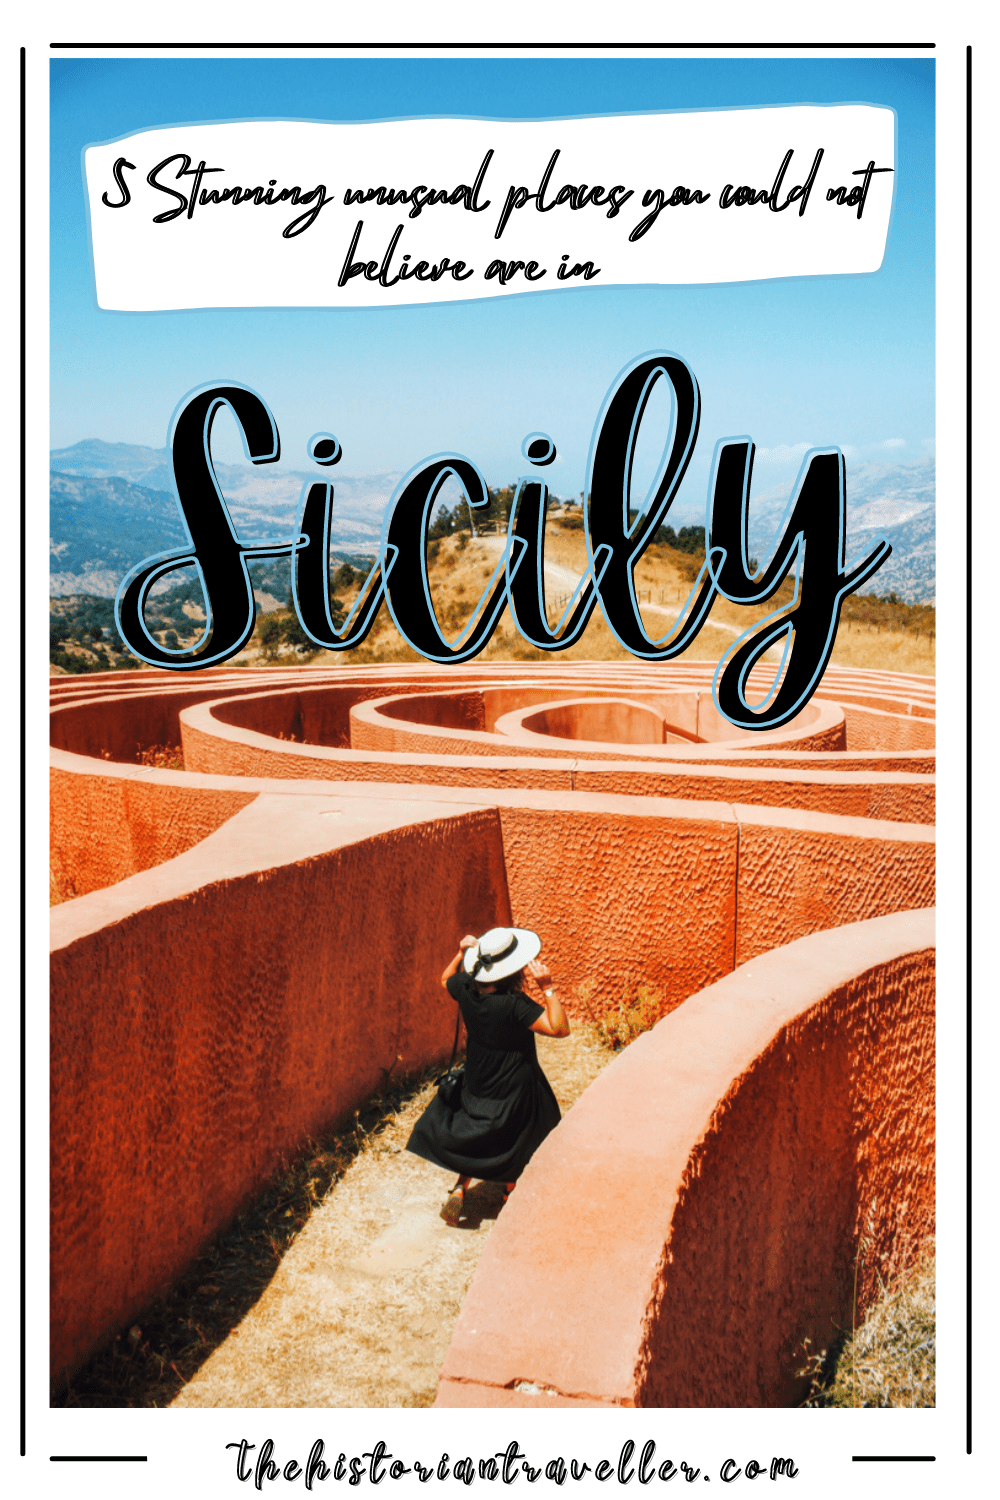 Unusual places to visit in Sicily